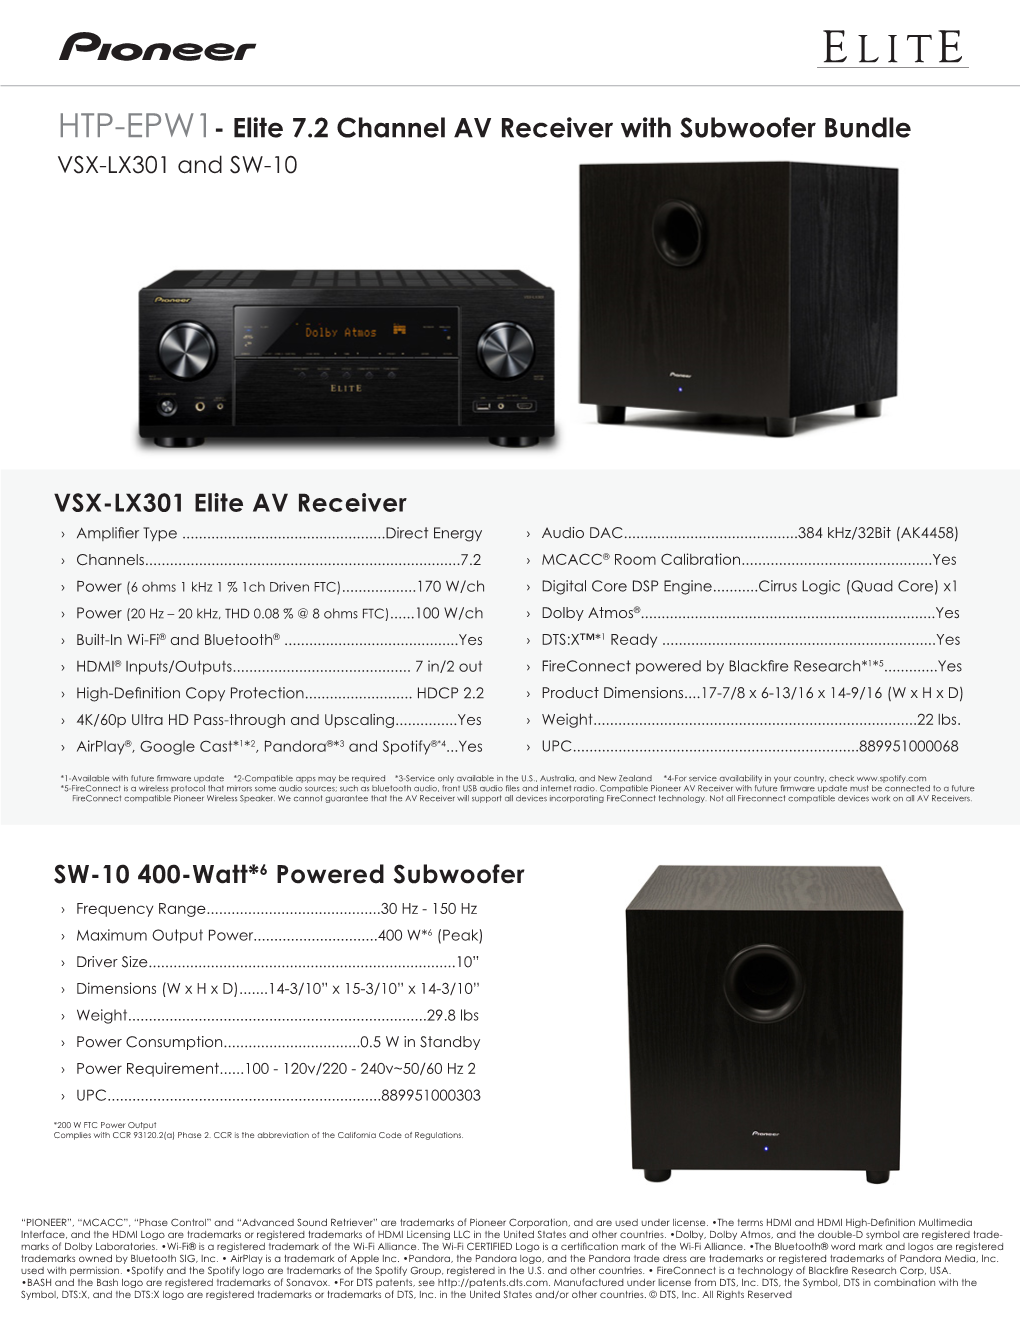 HTP-EPW1- Elite 7.2 Channel AV Receiver with Subwoofer Bundle VSX-LX301 and SW-10